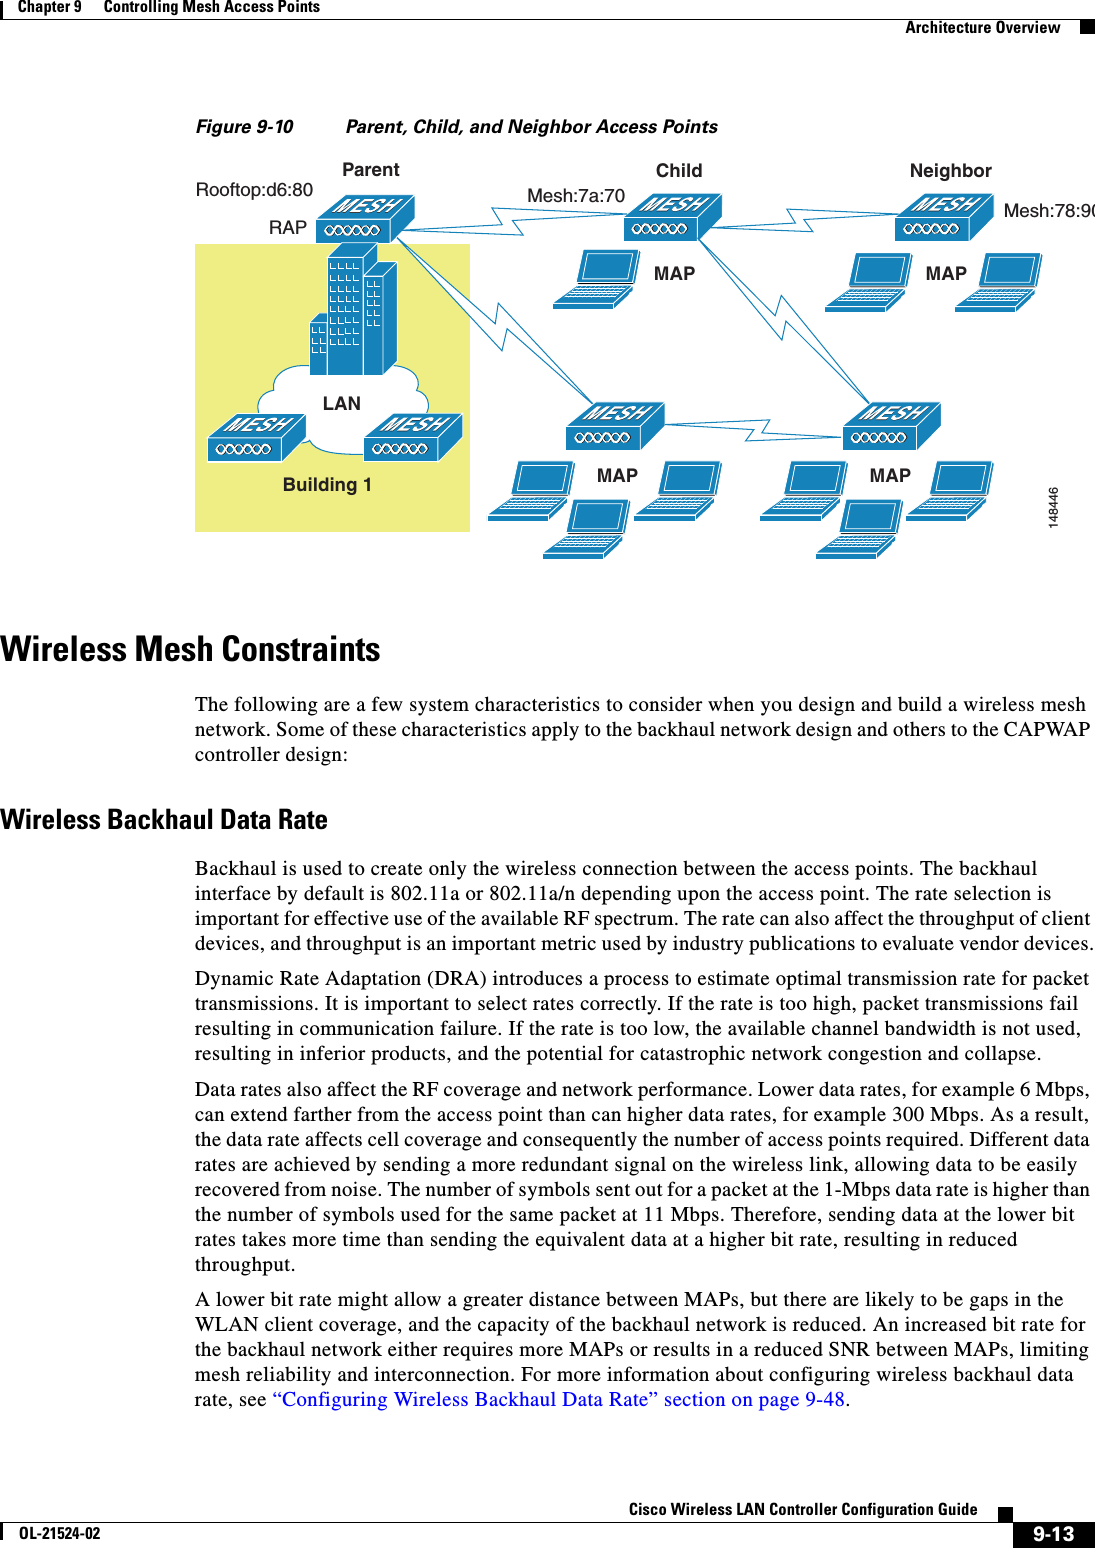  9-13Cisco Wireless LAN Controller Configuration GuideOL-21524-02Chapter 9      Controlling Mesh Access Points  Architecture OverviewFigure 9-10 Parent, Child, and Neighbor Access PointsWireless Mesh ConstraintsThe following are a few system characteristics to consider when you design and build a wireless mesh network. Some of these characteristics apply to the backhaul network design and others to the CAPWAP controller design:Wireless Backhaul Data RateBackhaul is used to create only the wireless connection between the access points. The backhaul interface by default is 802.11a or 802.11a/n depending upon the access point. The rate selection is important for effective use of the available RF spectrum. The rate can also affect the throughput of client devices, and throughput is an important metric used by industry publications to evaluate vendor devices.Dynamic Rate Adaptation (DRA) introduces a process to estimate optimal transmission rate for packet transmissions. It is important to select rates correctly. If the rate is too high, packet transmissions fail resulting in communication failure. If the rate is too low, the available channel bandwidth is not used, resulting in inferior products, and the potential for catastrophic network congestion and collapse.Data rates also affect the RF coverage and network performance. Lower data rates, for example 6 Mbps, can extend farther from the access point than can higher data rates, for example 300 Mbps. As a result, the data rate affects cell coverage and consequently the number of access points required. Different data rates are achieved by sending a more redundant signal on the wireless link, allowing data to be easily recovered from noise. The number of symbols sent out for a packet at the 1-Mbps data rate is higher than the number of symbols used for the same packet at 11 Mbps. Therefore, sending data at the lower bit rates takes more time than sending the equivalent data at a higher bit rate, resulting in reduced throughput.A lower bit rate might allow a greater distance between MAPs, but there are likely to be gaps in the WLAN client coverage, and the capacity of the backhaul network is reduced. An increased bit rate for the backhaul network either requires more MAPs or results in a reduced SNR between MAPs, limiting mesh reliability and interconnection. For more information about configuring wireless backhaul data rate, see “Configuring Wireless Backhaul Data Rate” section on page 9-48.148446LANRAPBuilding 1ParentRooftop:d6:80ChildMesh:7a:70MAPMAPNeighborMesh:78:90MAPMAP